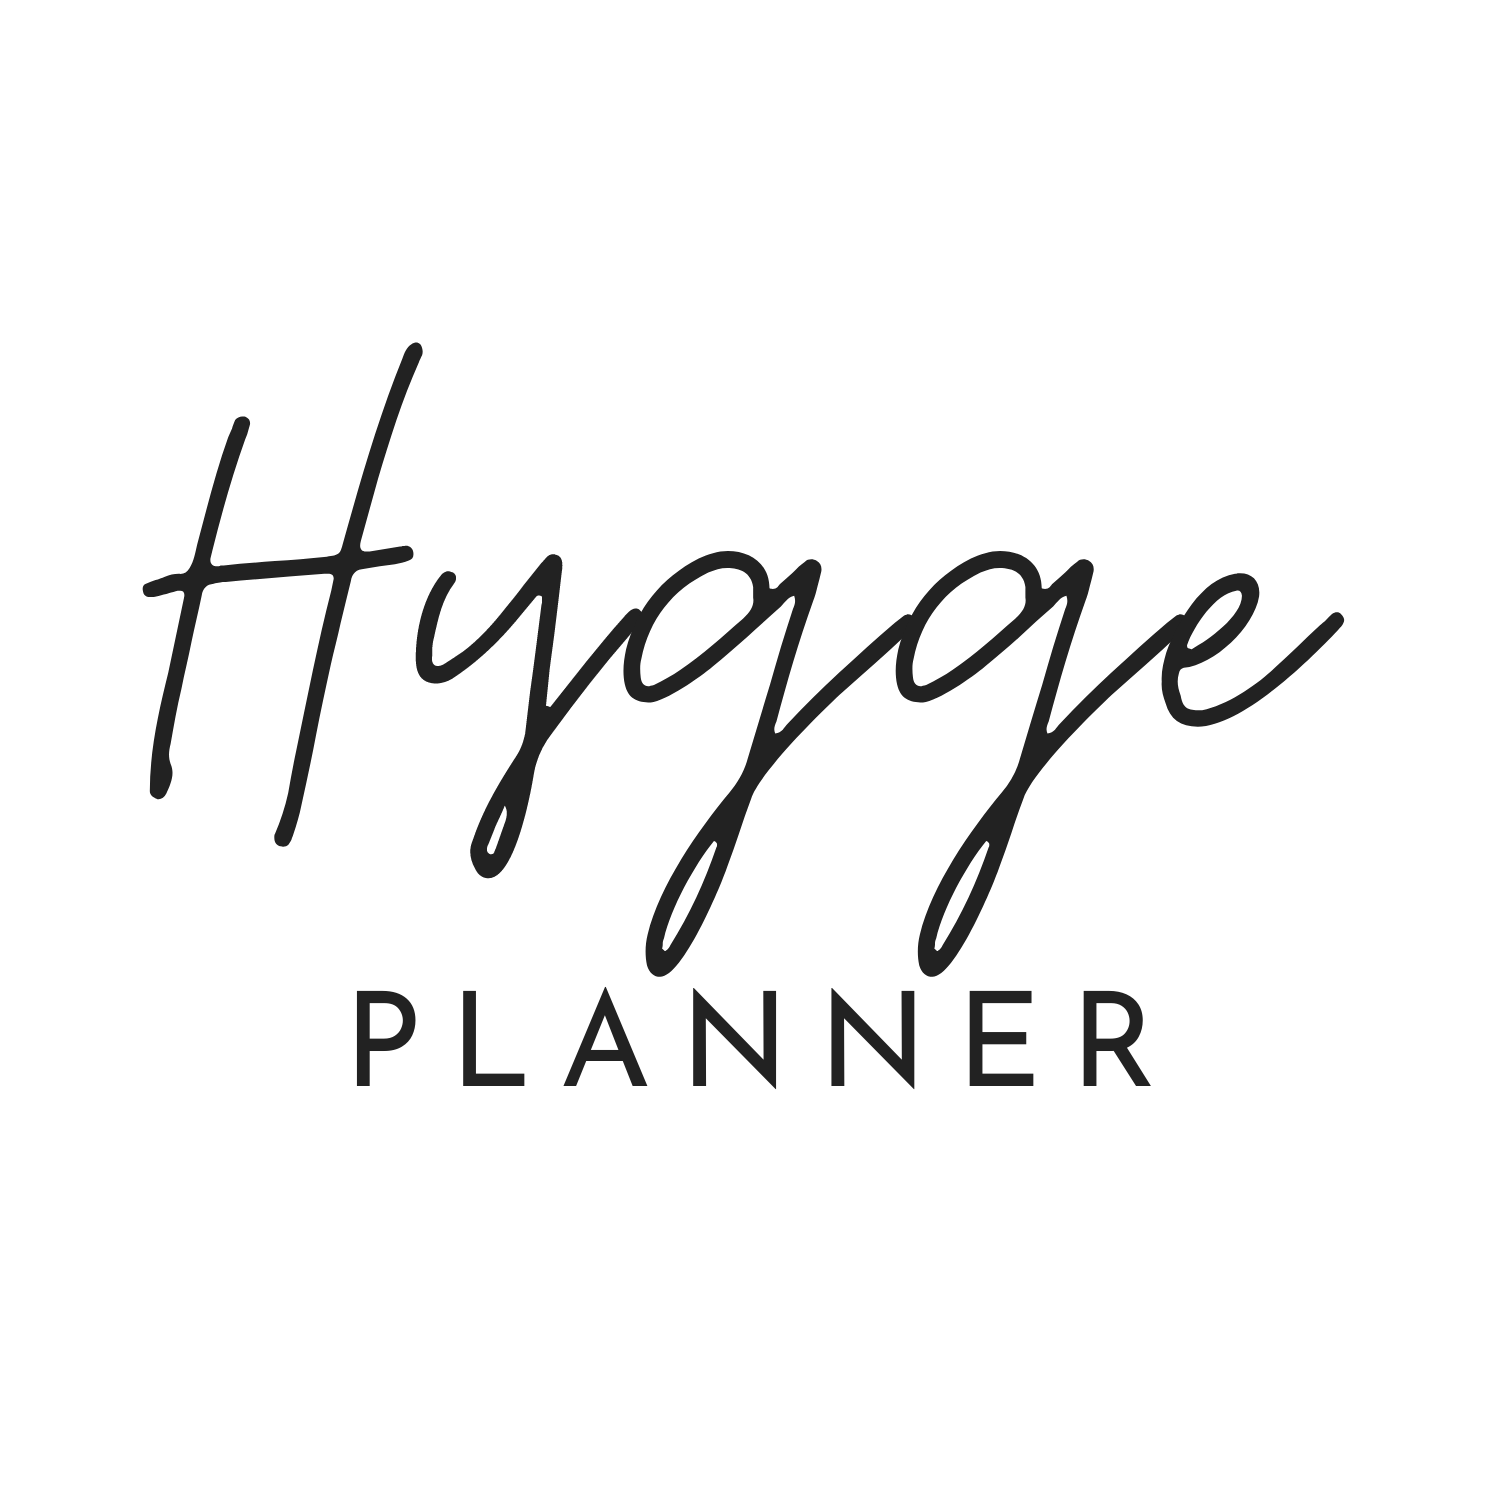 The Hygge Planner